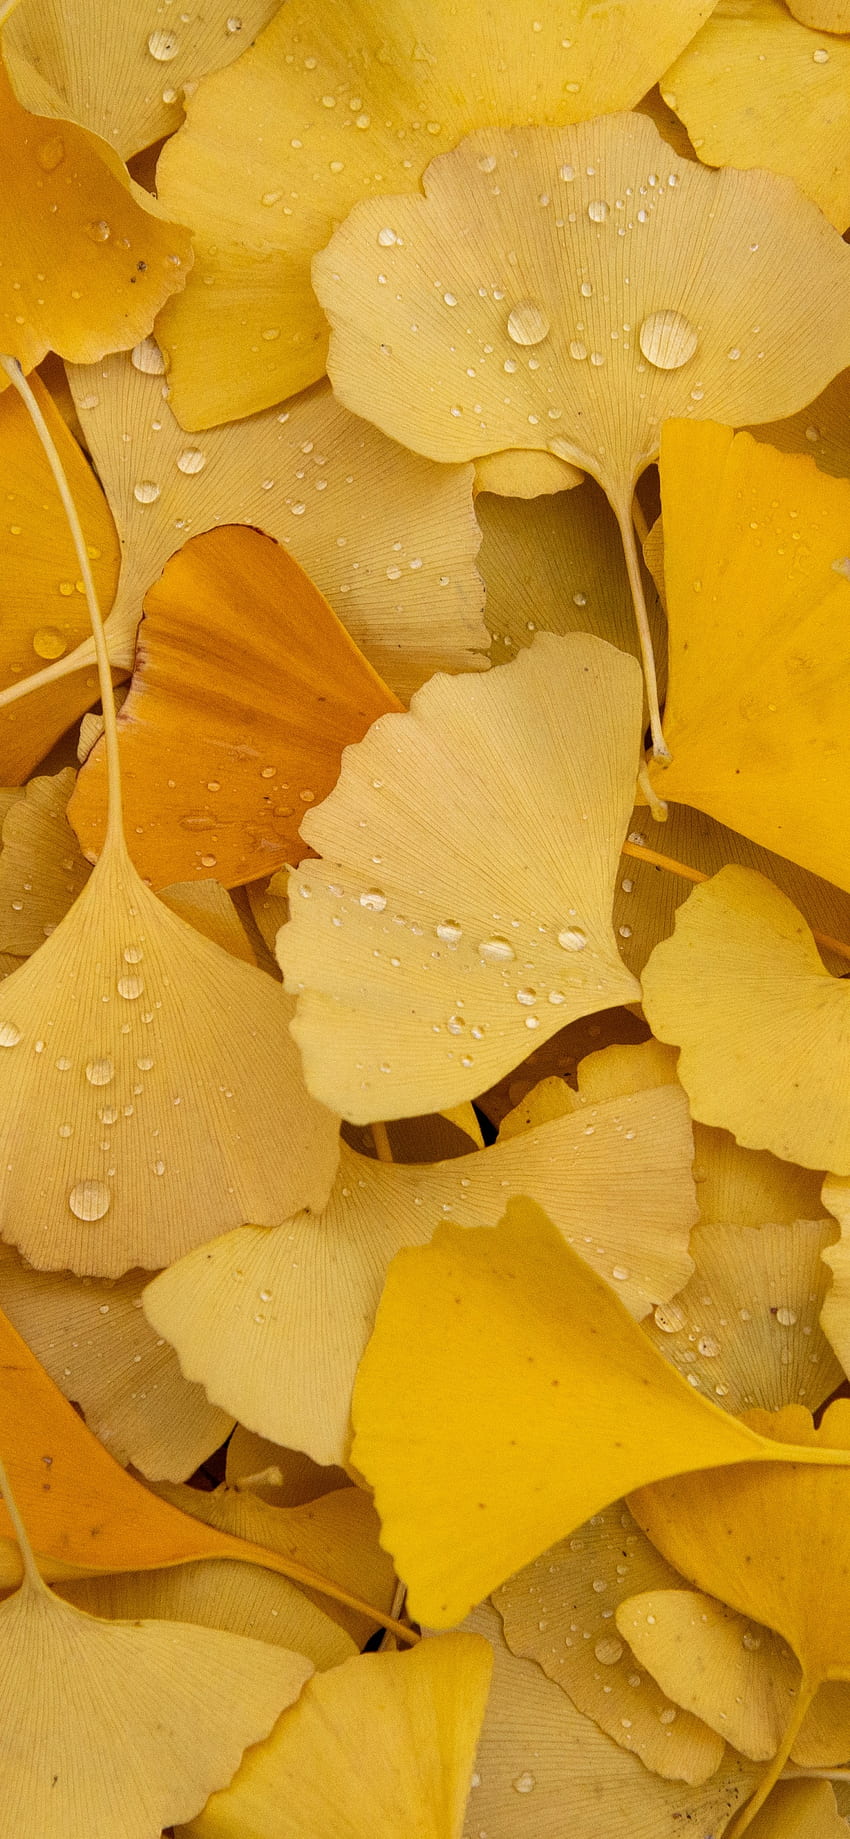 Ginkgo Leaves , Yellow leaves, Autumn, Foliage, Dew Drops, Nature, Yellow Leaf HD phone wallpaper